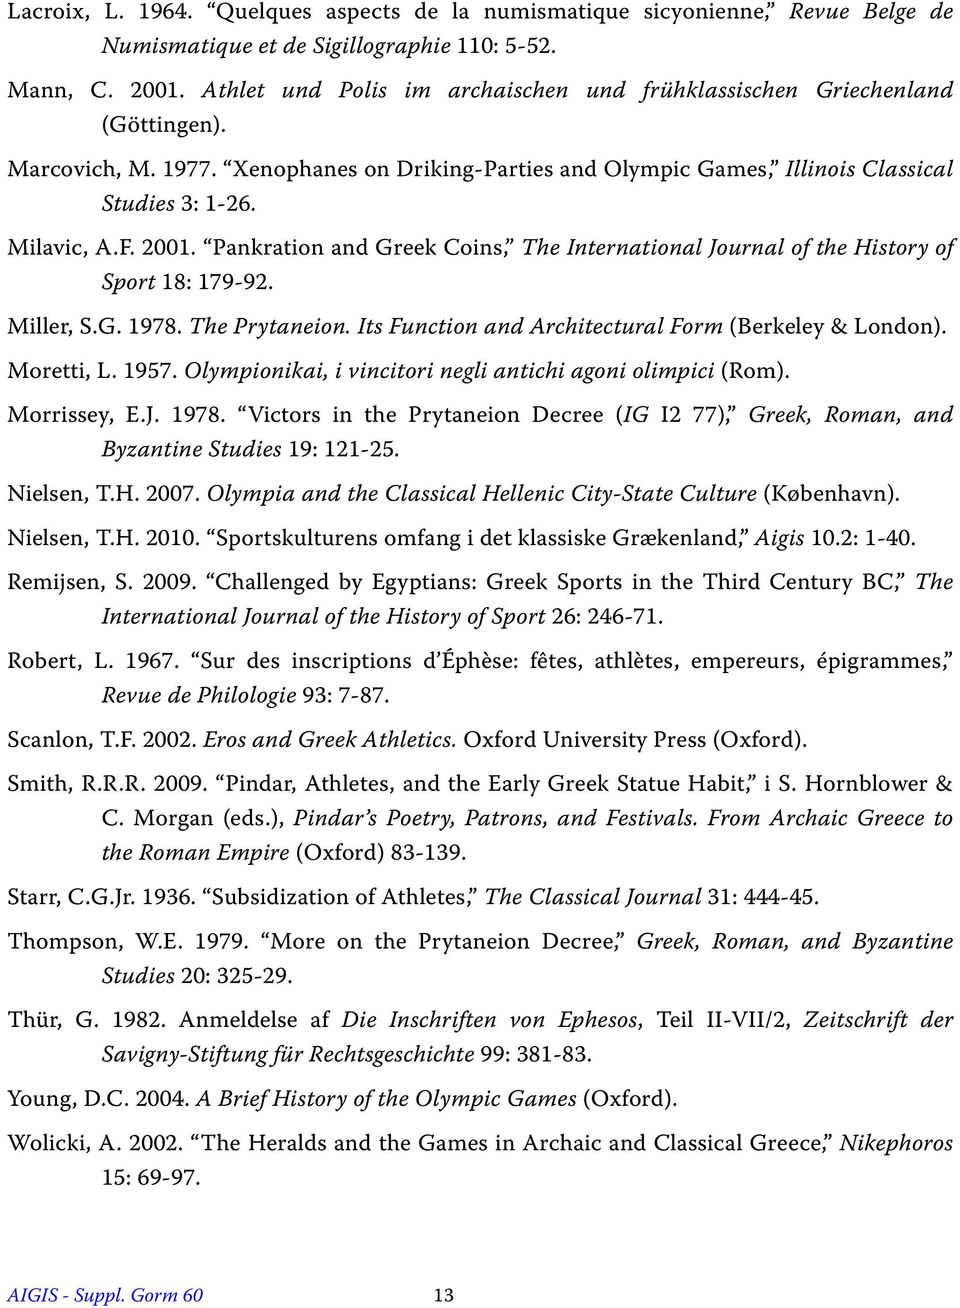 2001. Pankration and Greek Coins, The International Journal of the History of Sport 18: 179-92. Miller, S.G. 1978. The Prytaneion. Its Function and Architectural Form (Berkeley & London). Moretti, L.